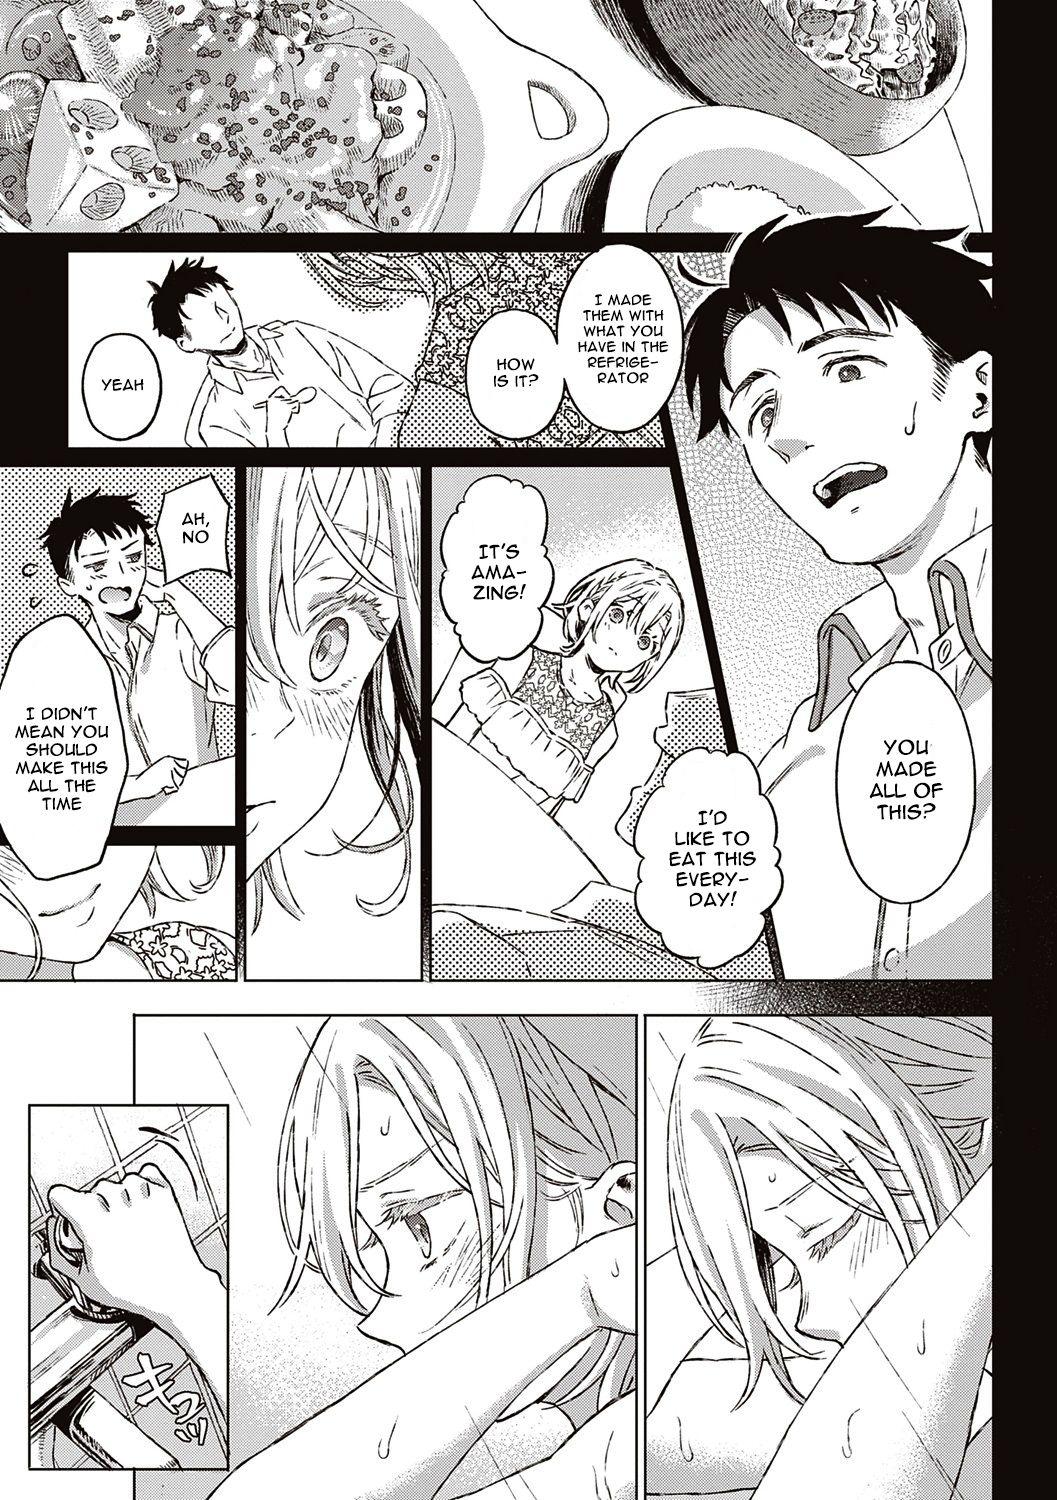 Chick Shinsou no Hanayome + After Story | Closeted Bride + After Story Nasty Porn - Page 11